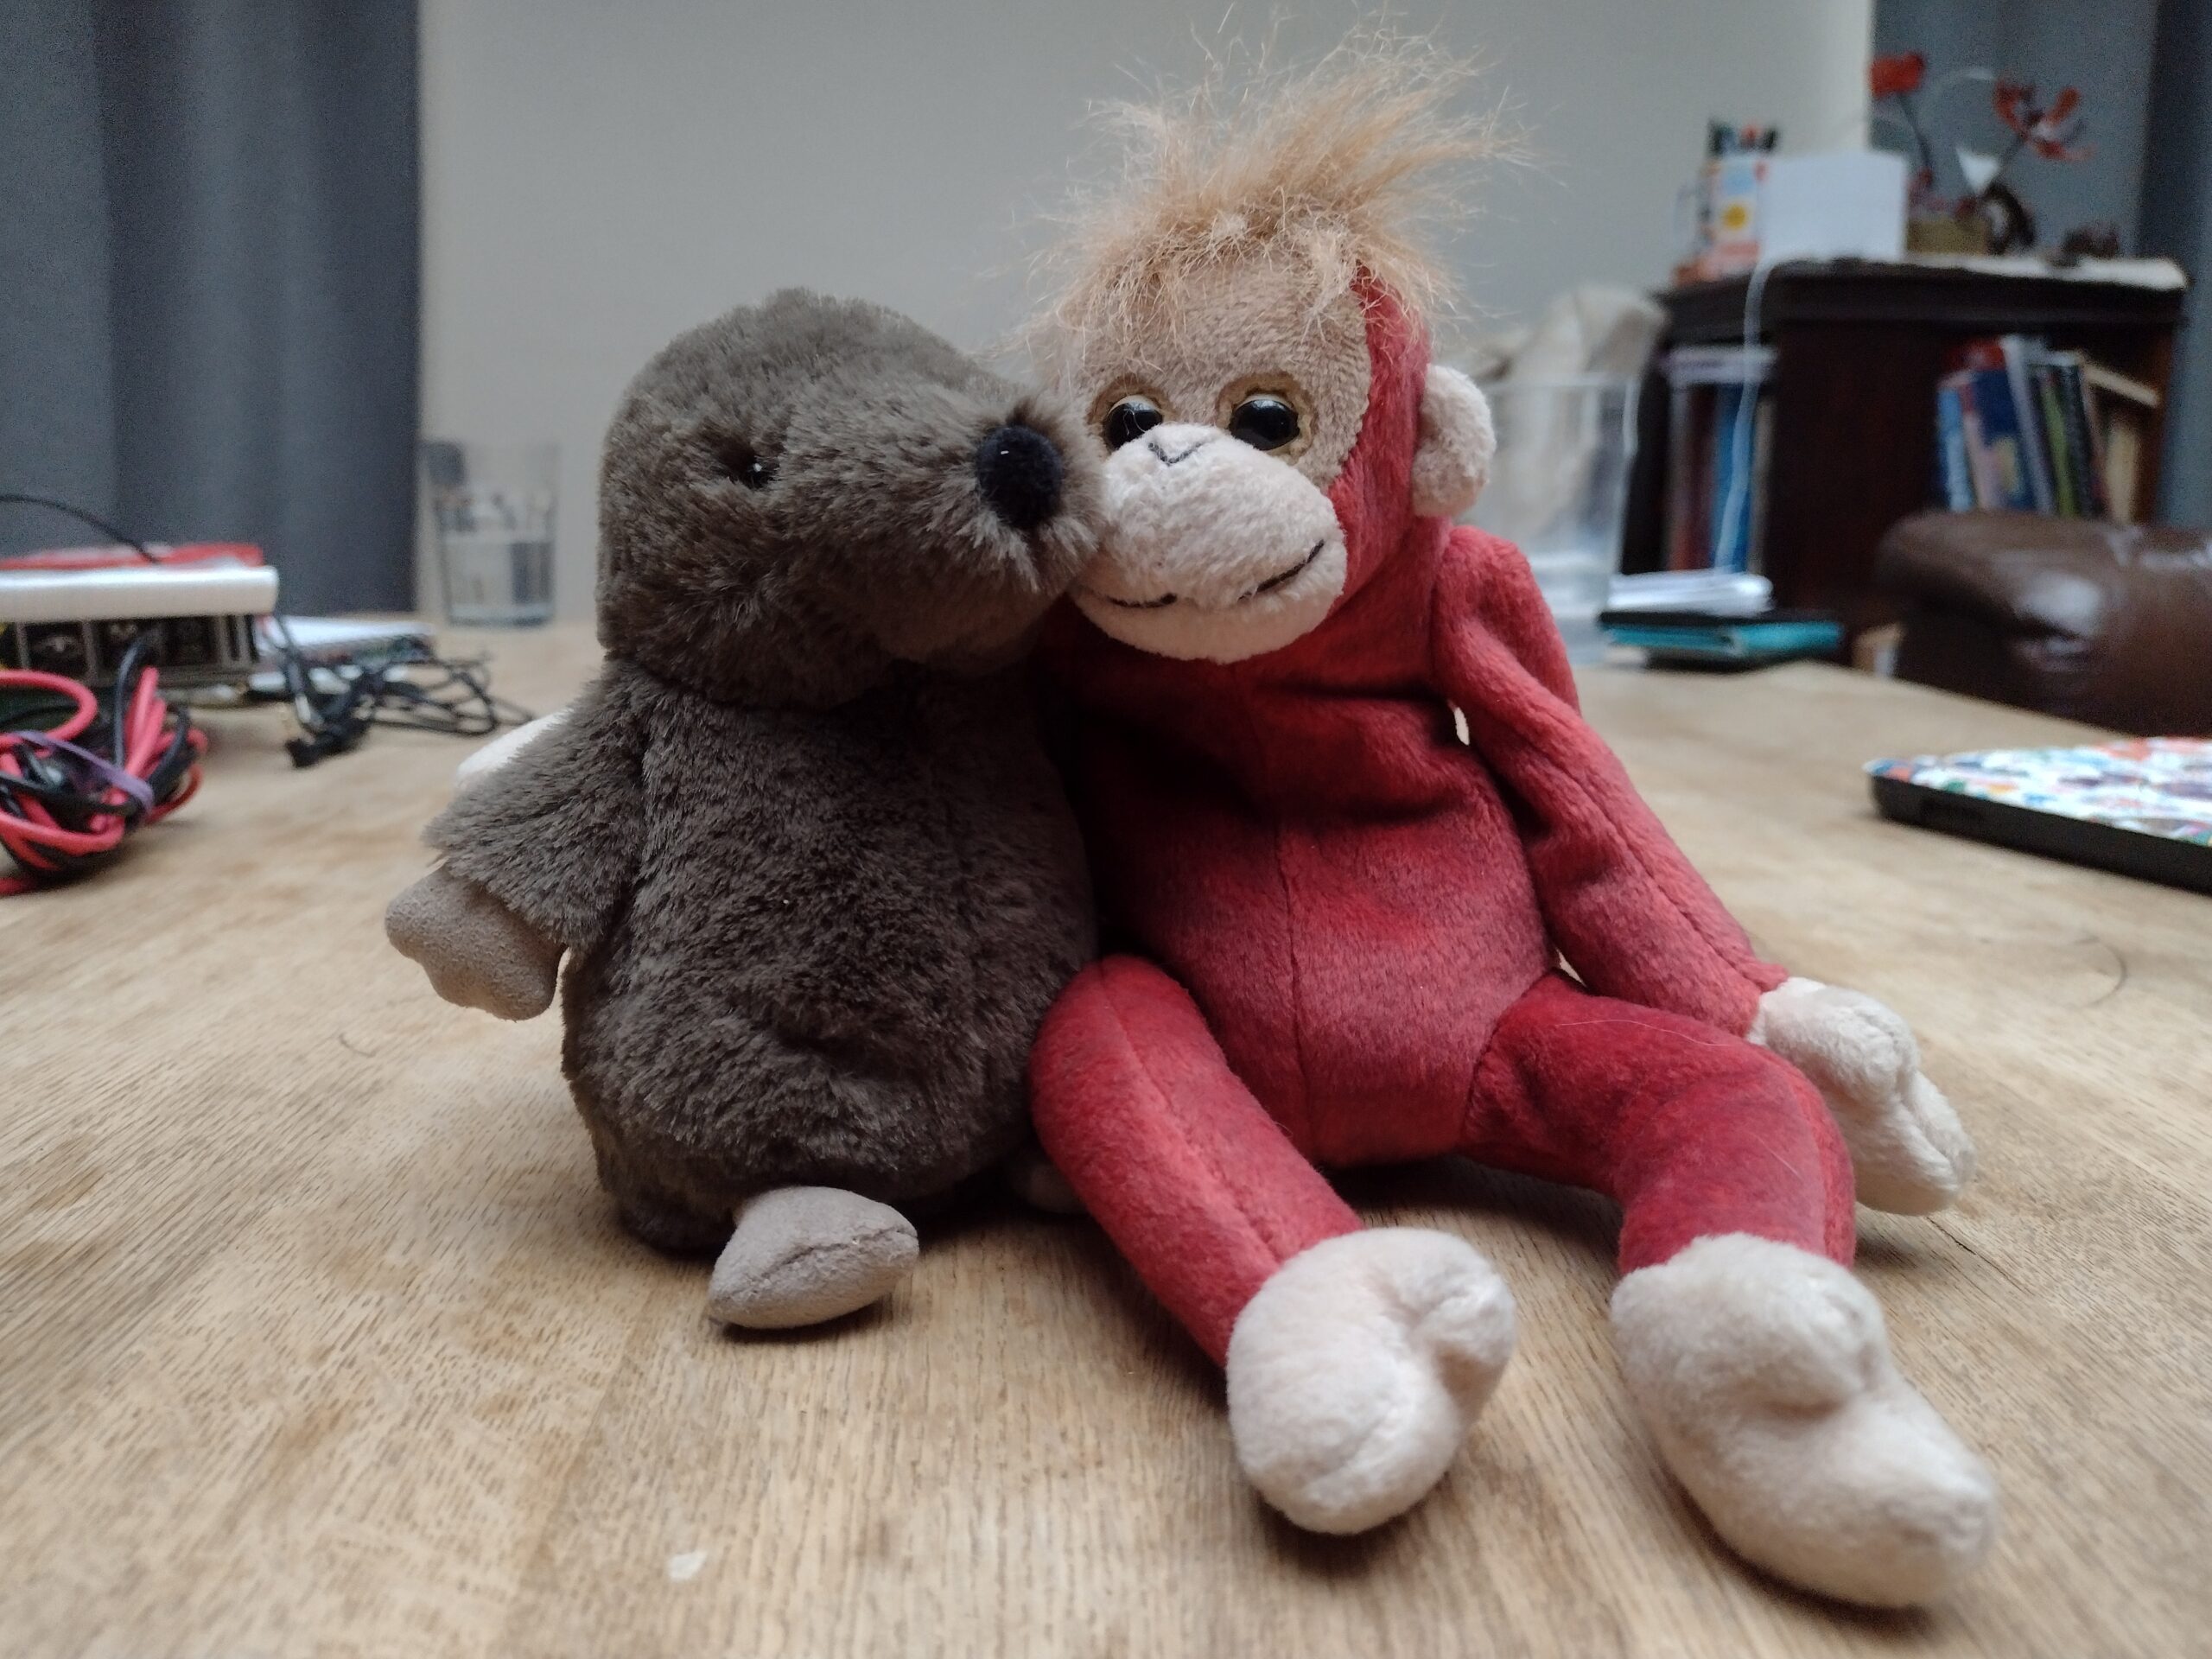 Two soft toys. A mole and an orangutang